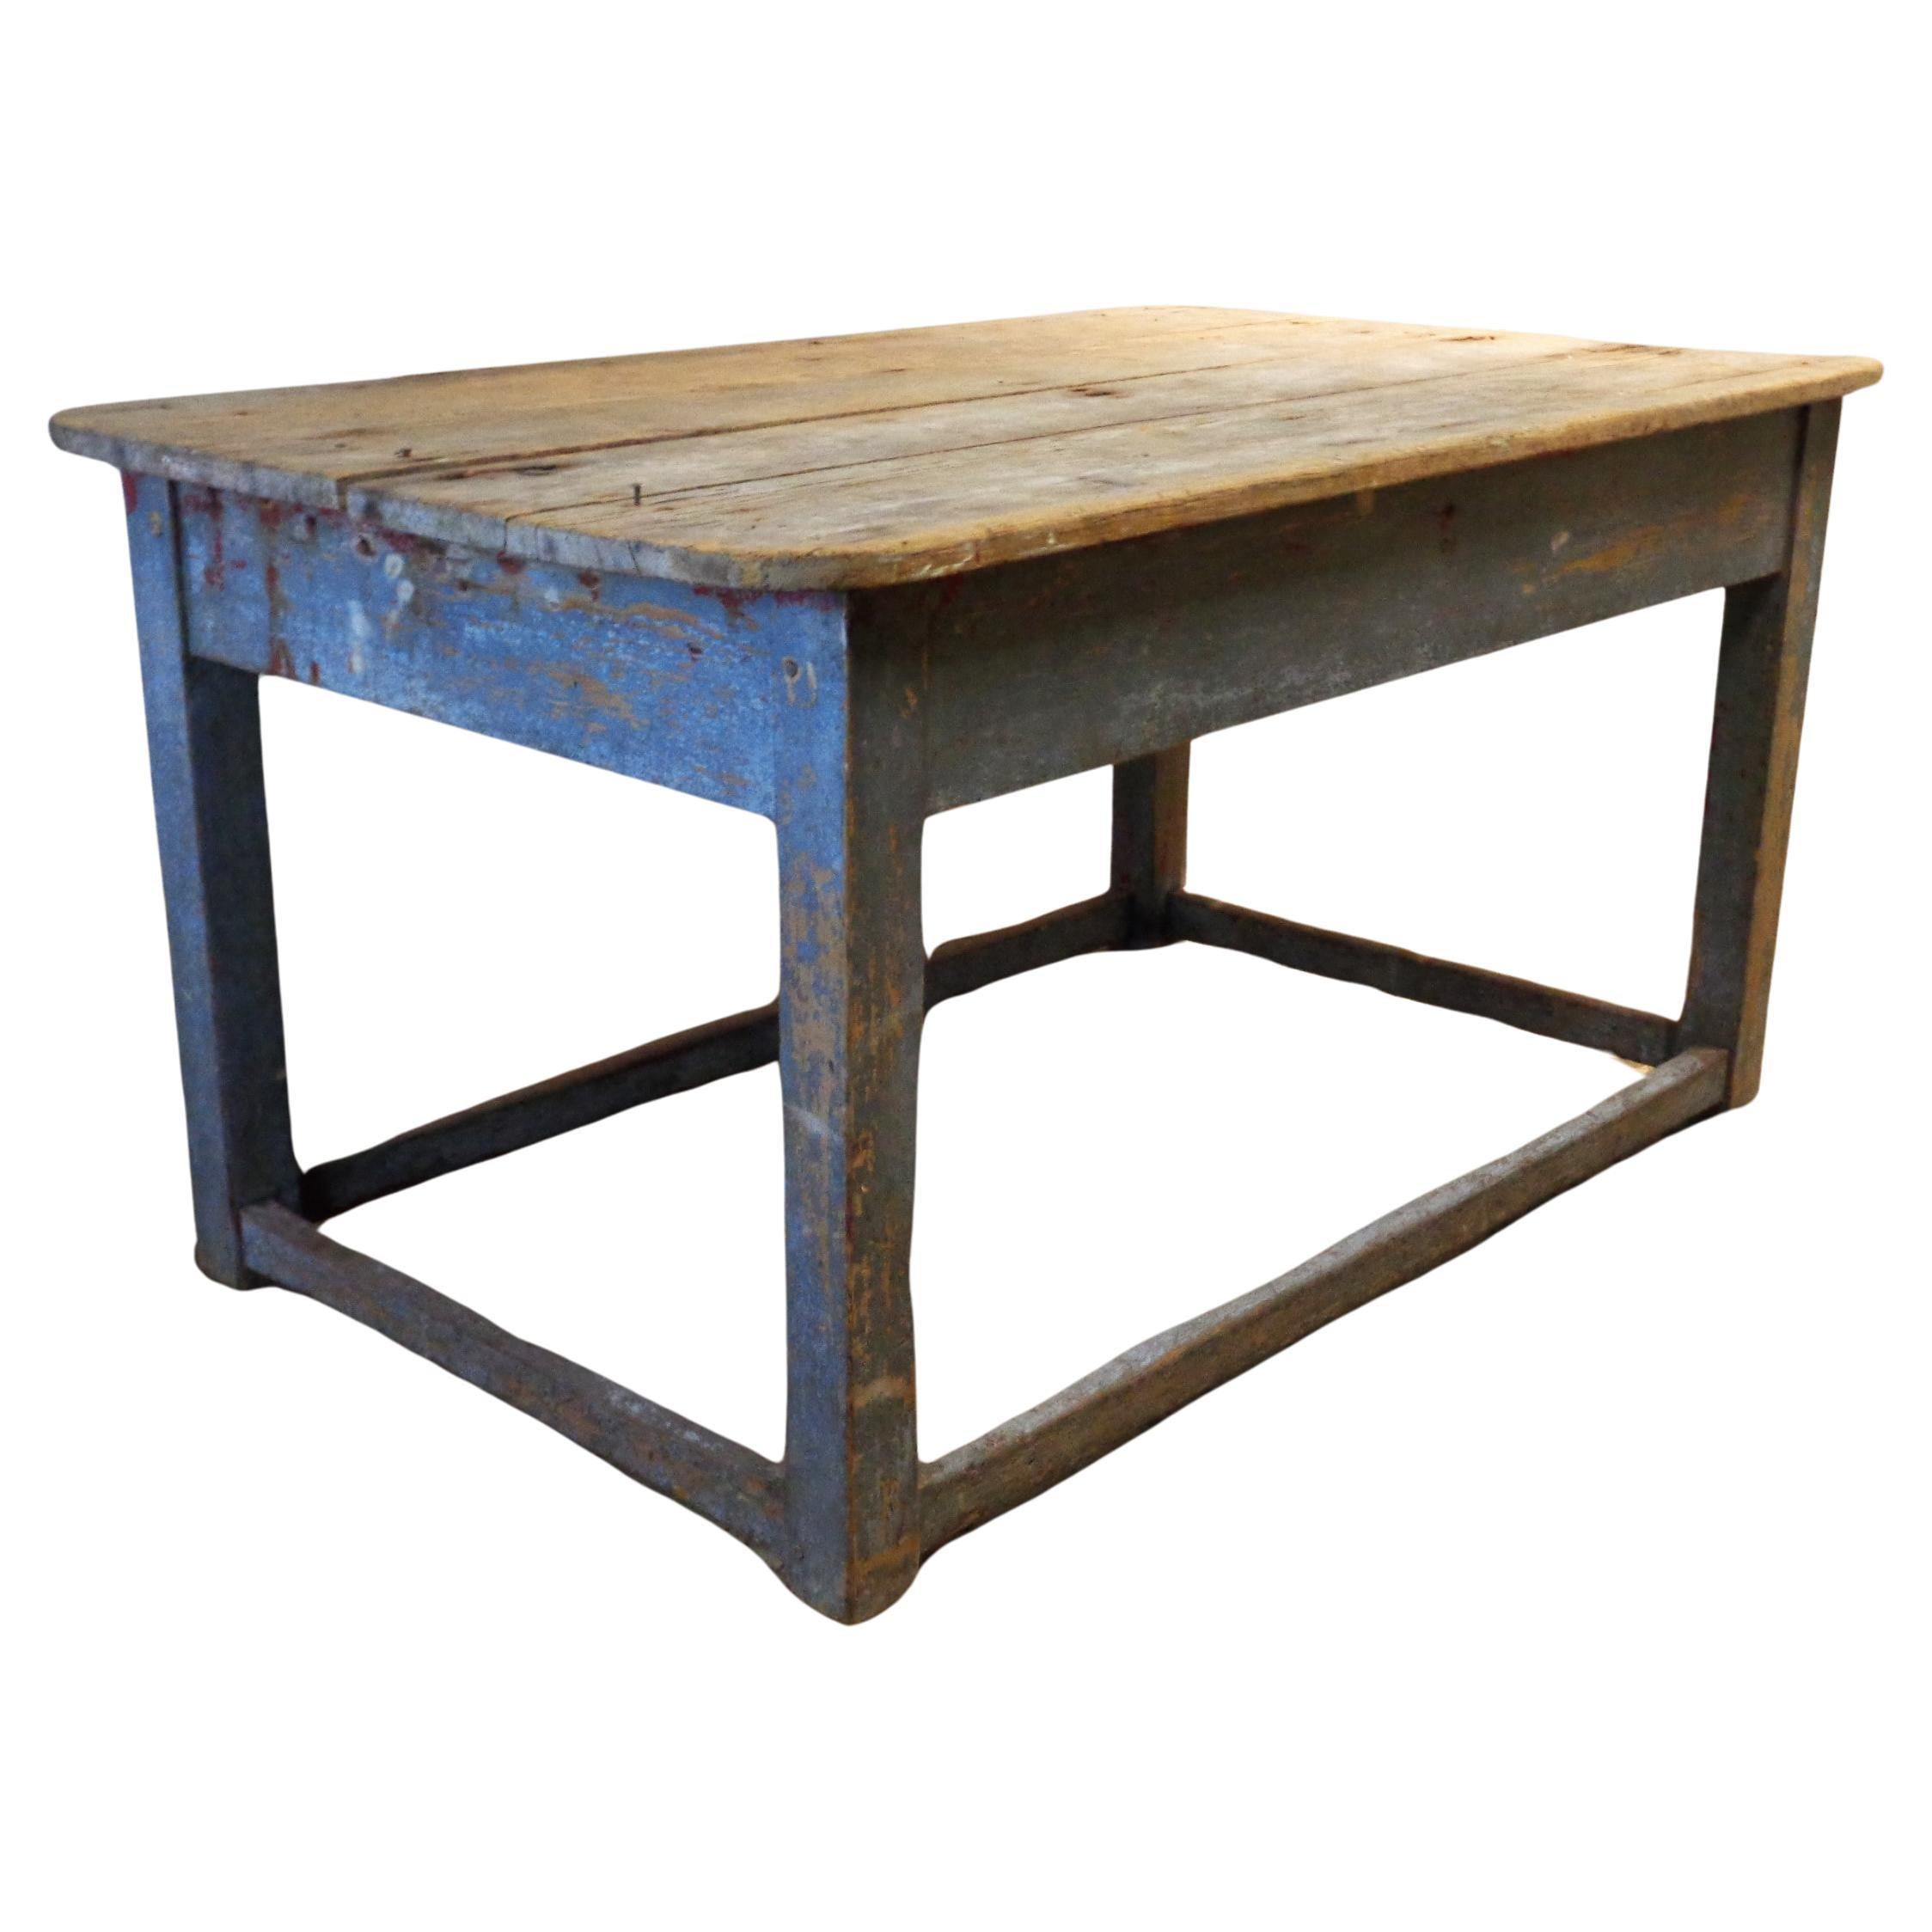  Early 19th Century Original Blue Painted Rustic Work Table  For Sale 4